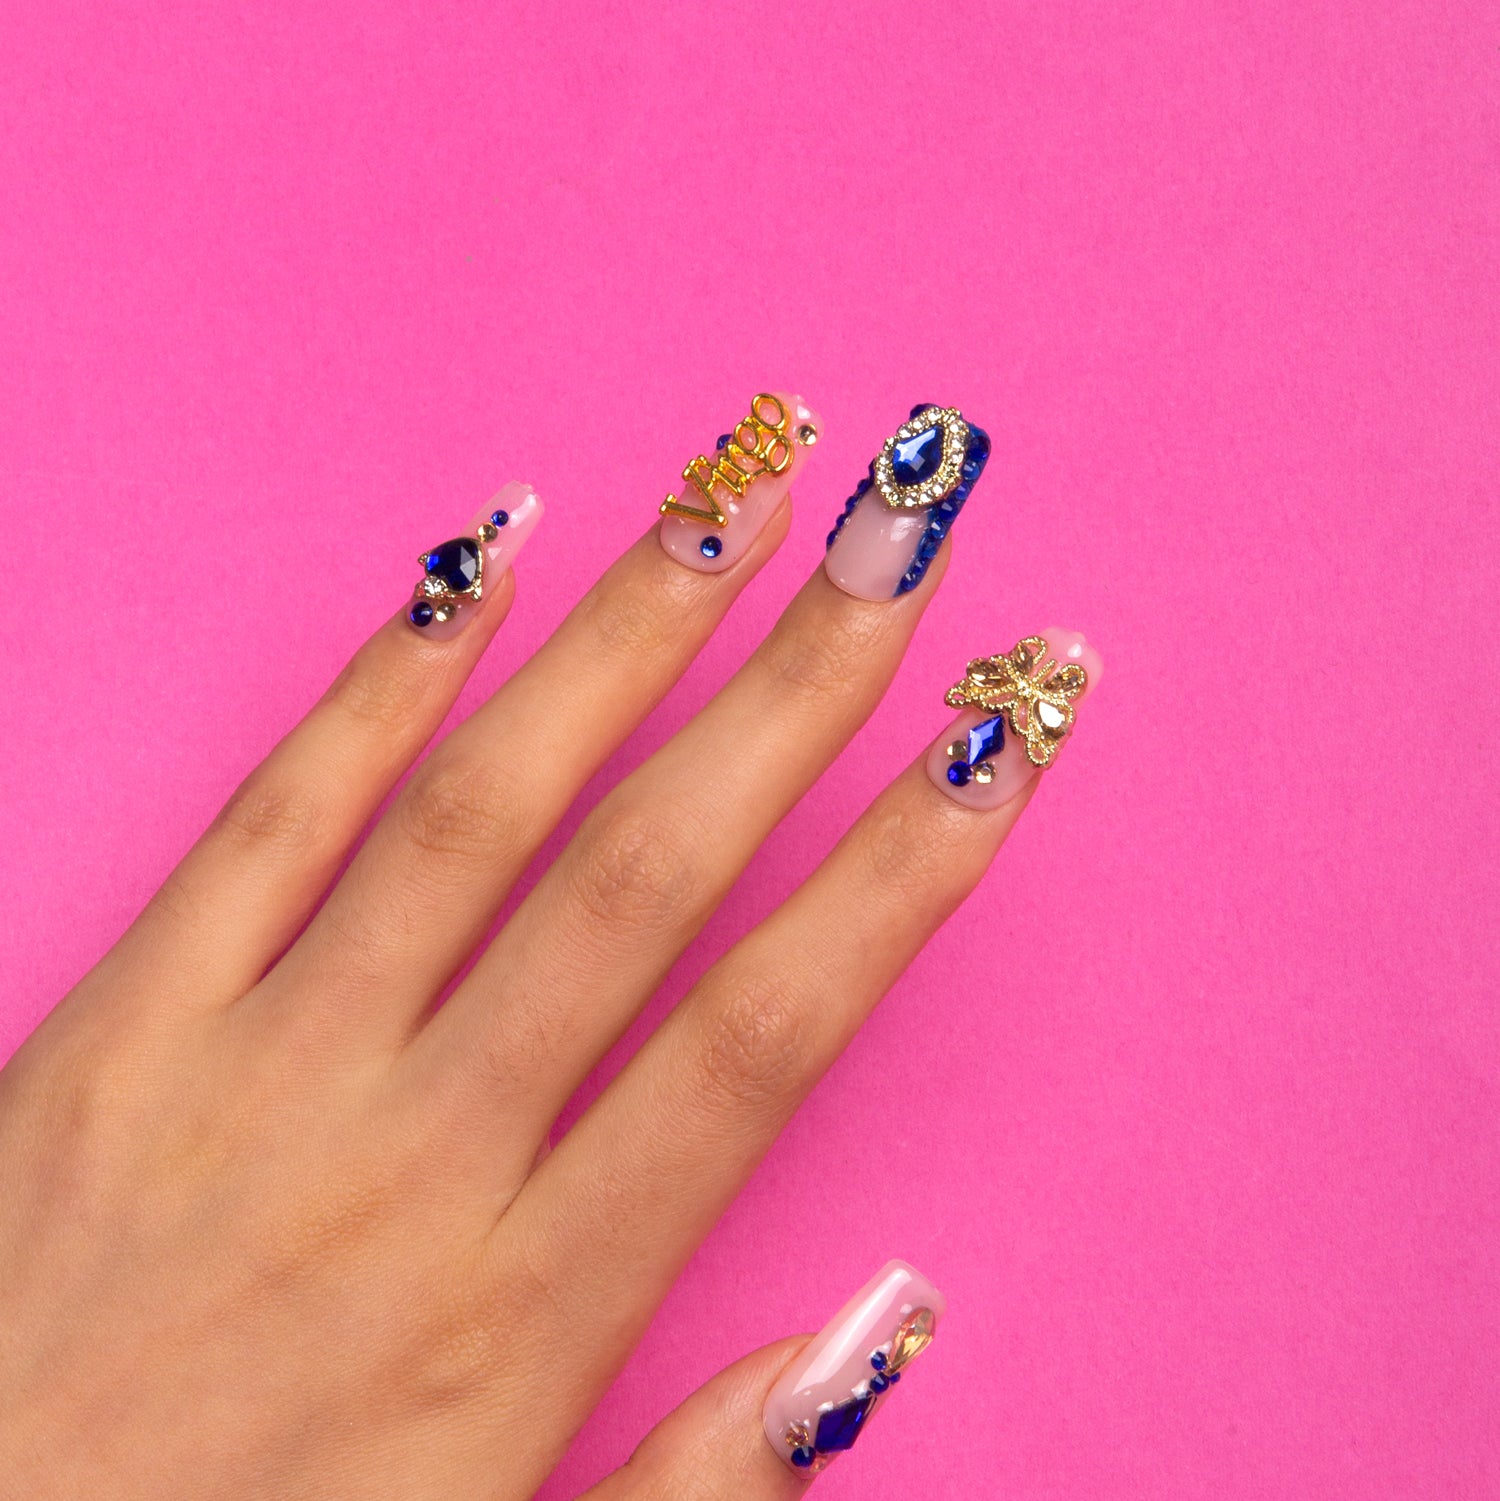 Virgo blue french tip Square nails H164